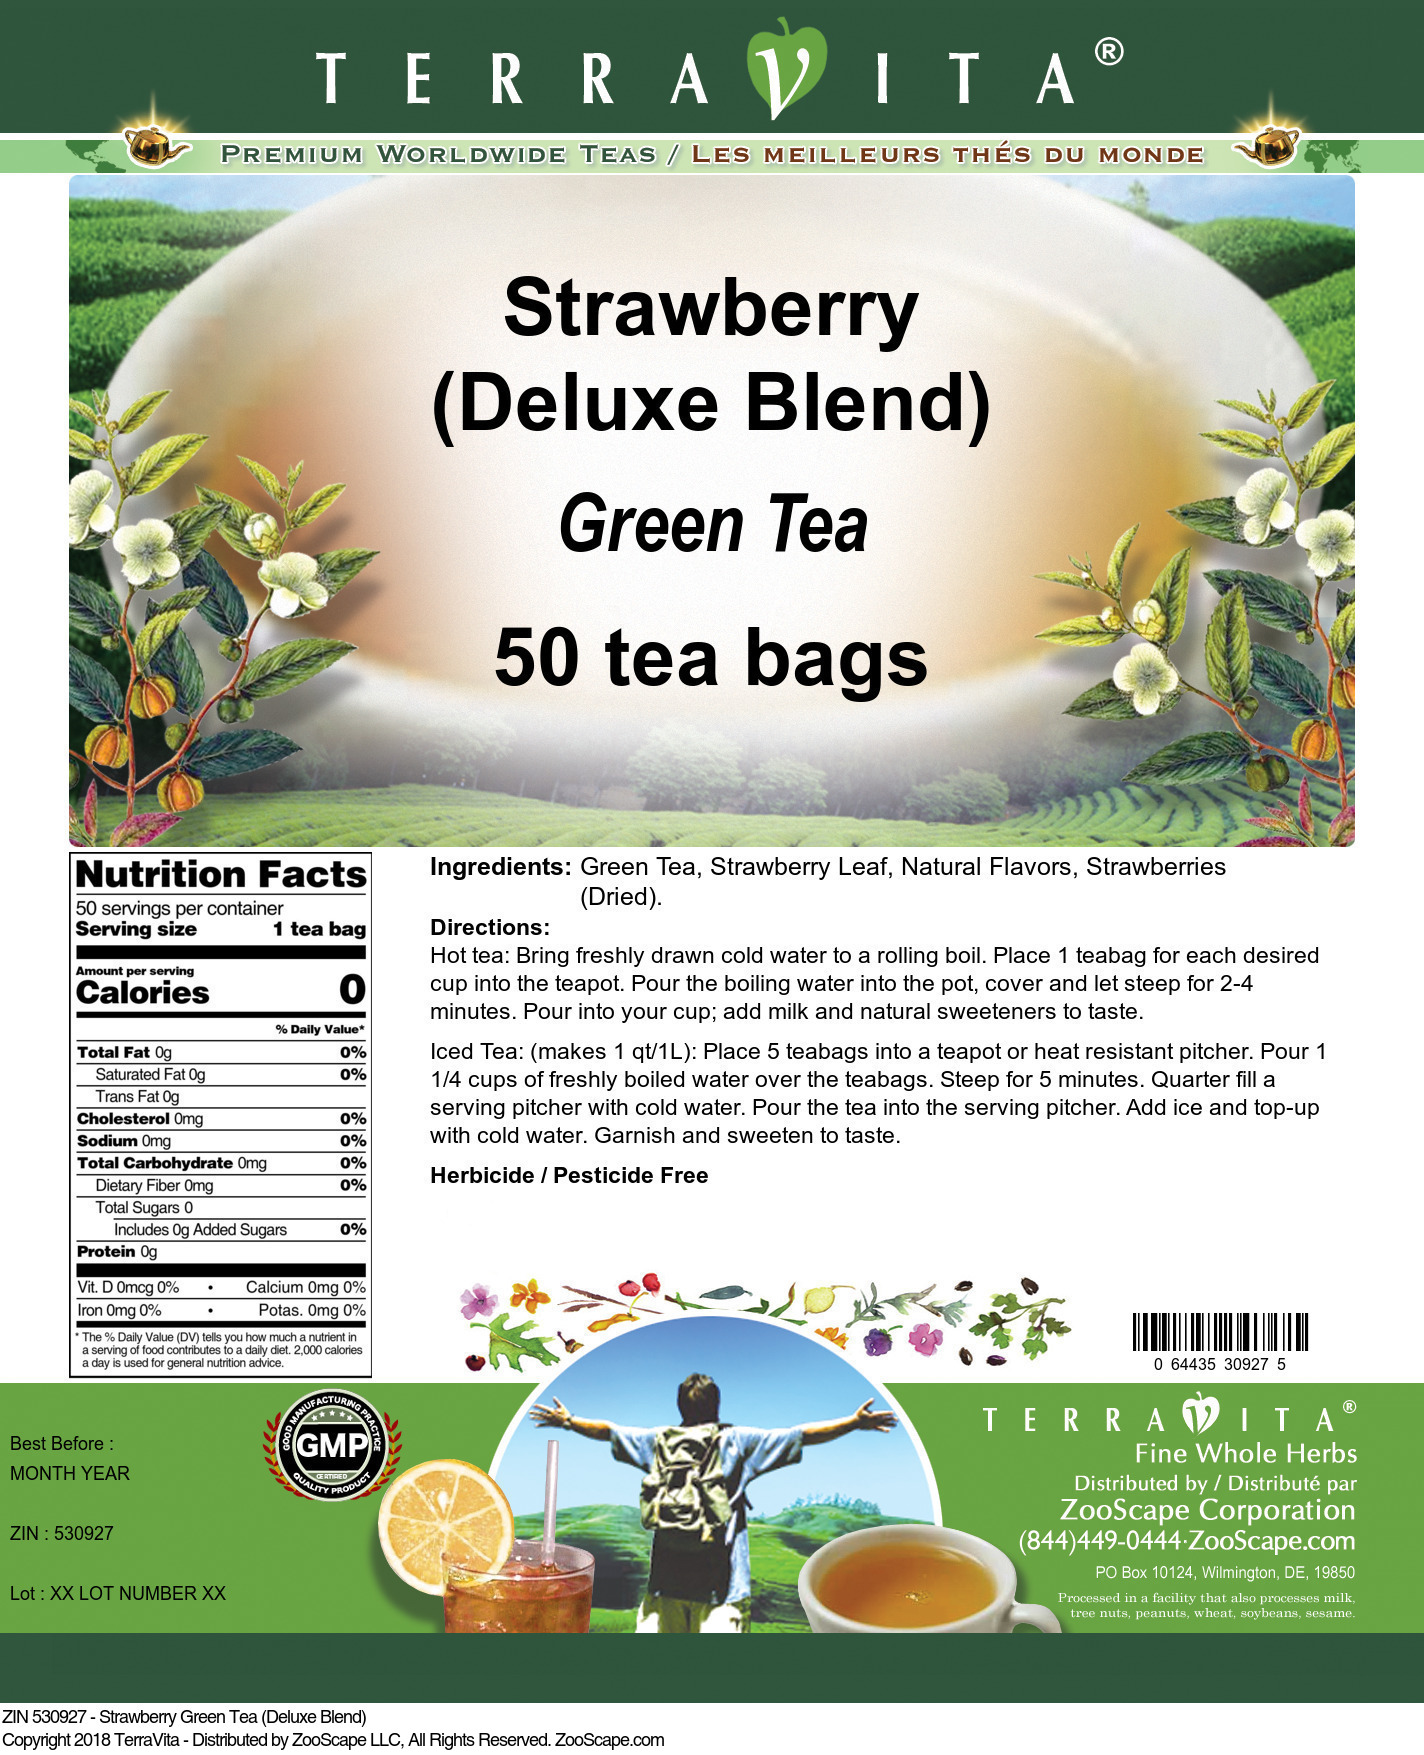 Strawberry Green Tea (Deluxe Blend) - Label